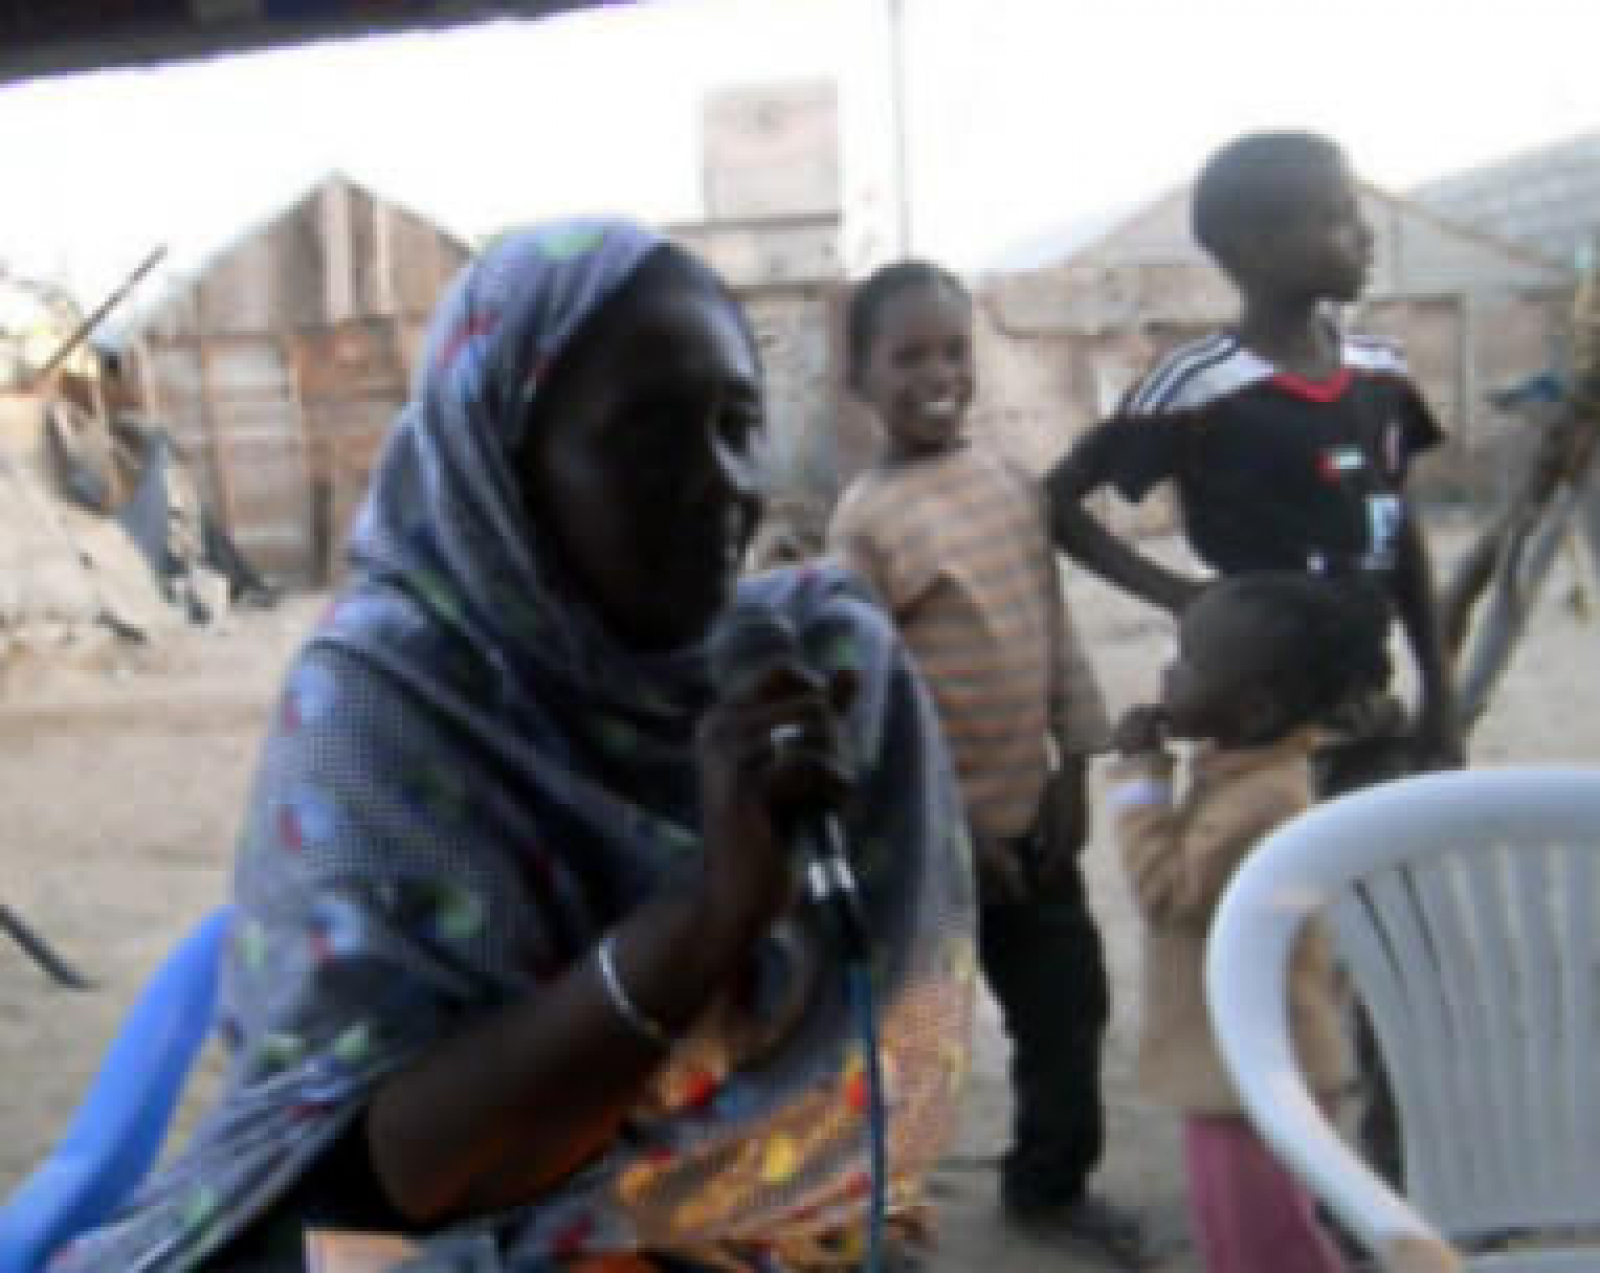 Mauritanian Women Advocate for Rights with Public Petition